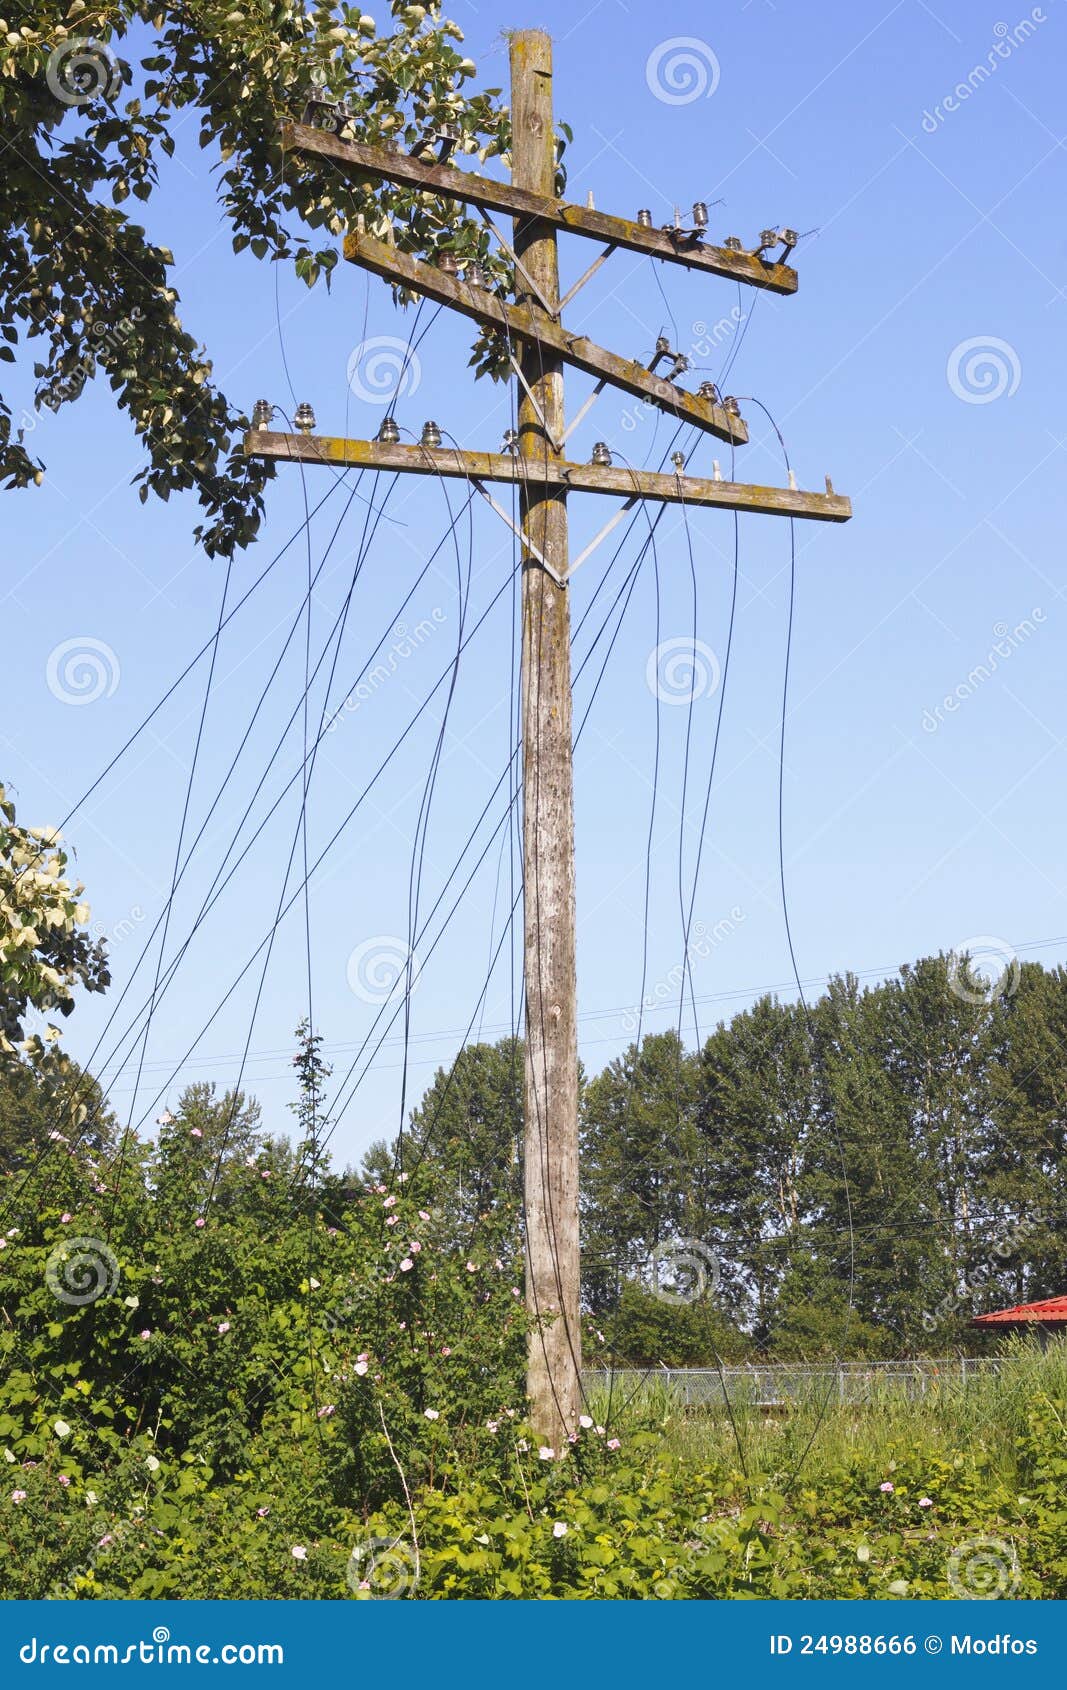 Broken Power Lines Stock Photos, Images & Pictures